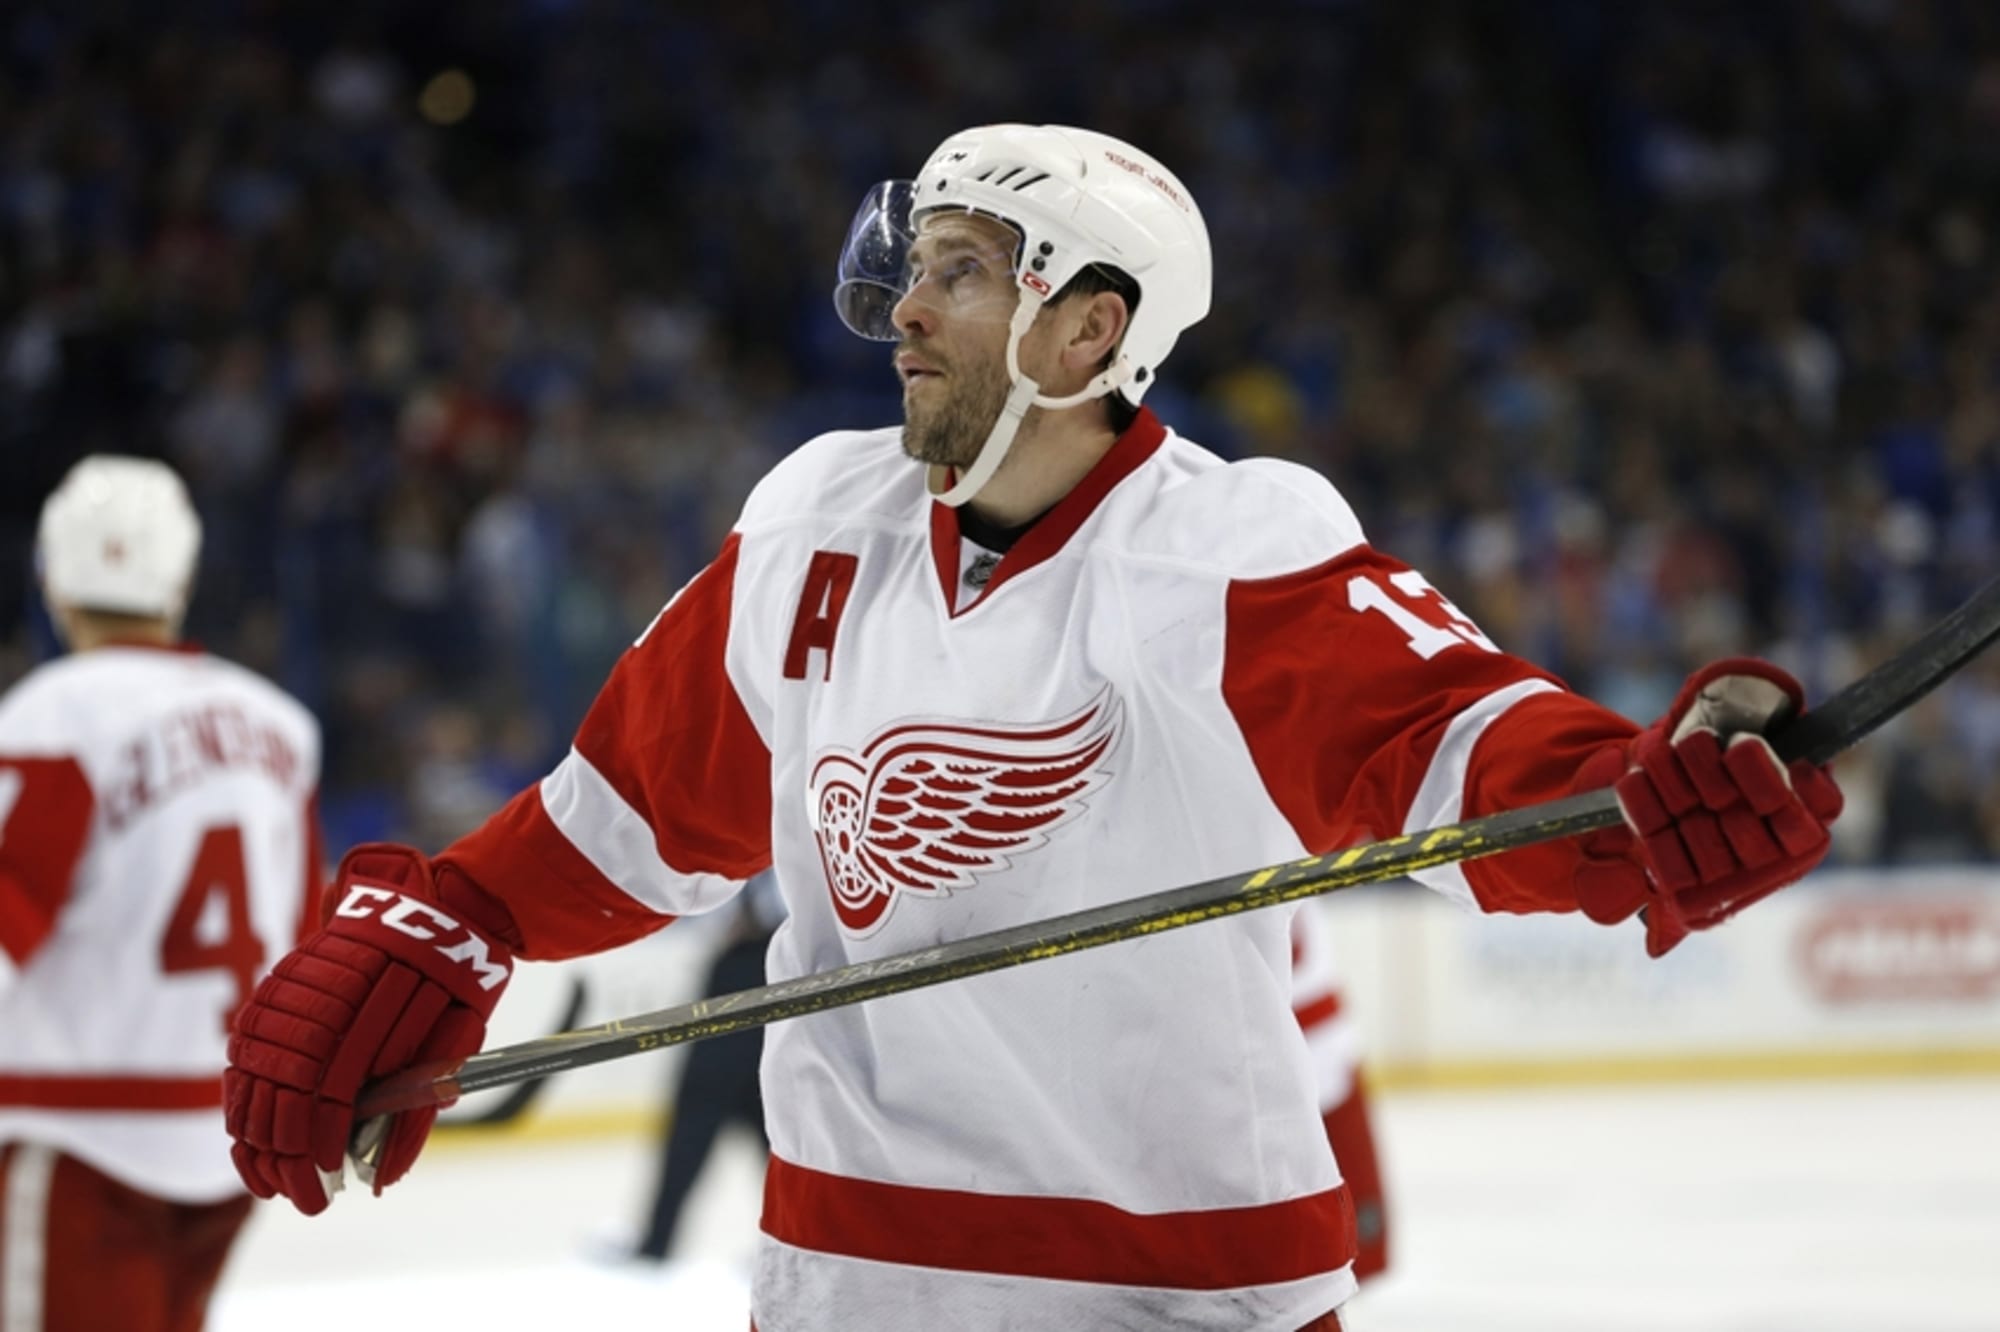 Pavel Datsyuk plans to retire from NHL after playoffs